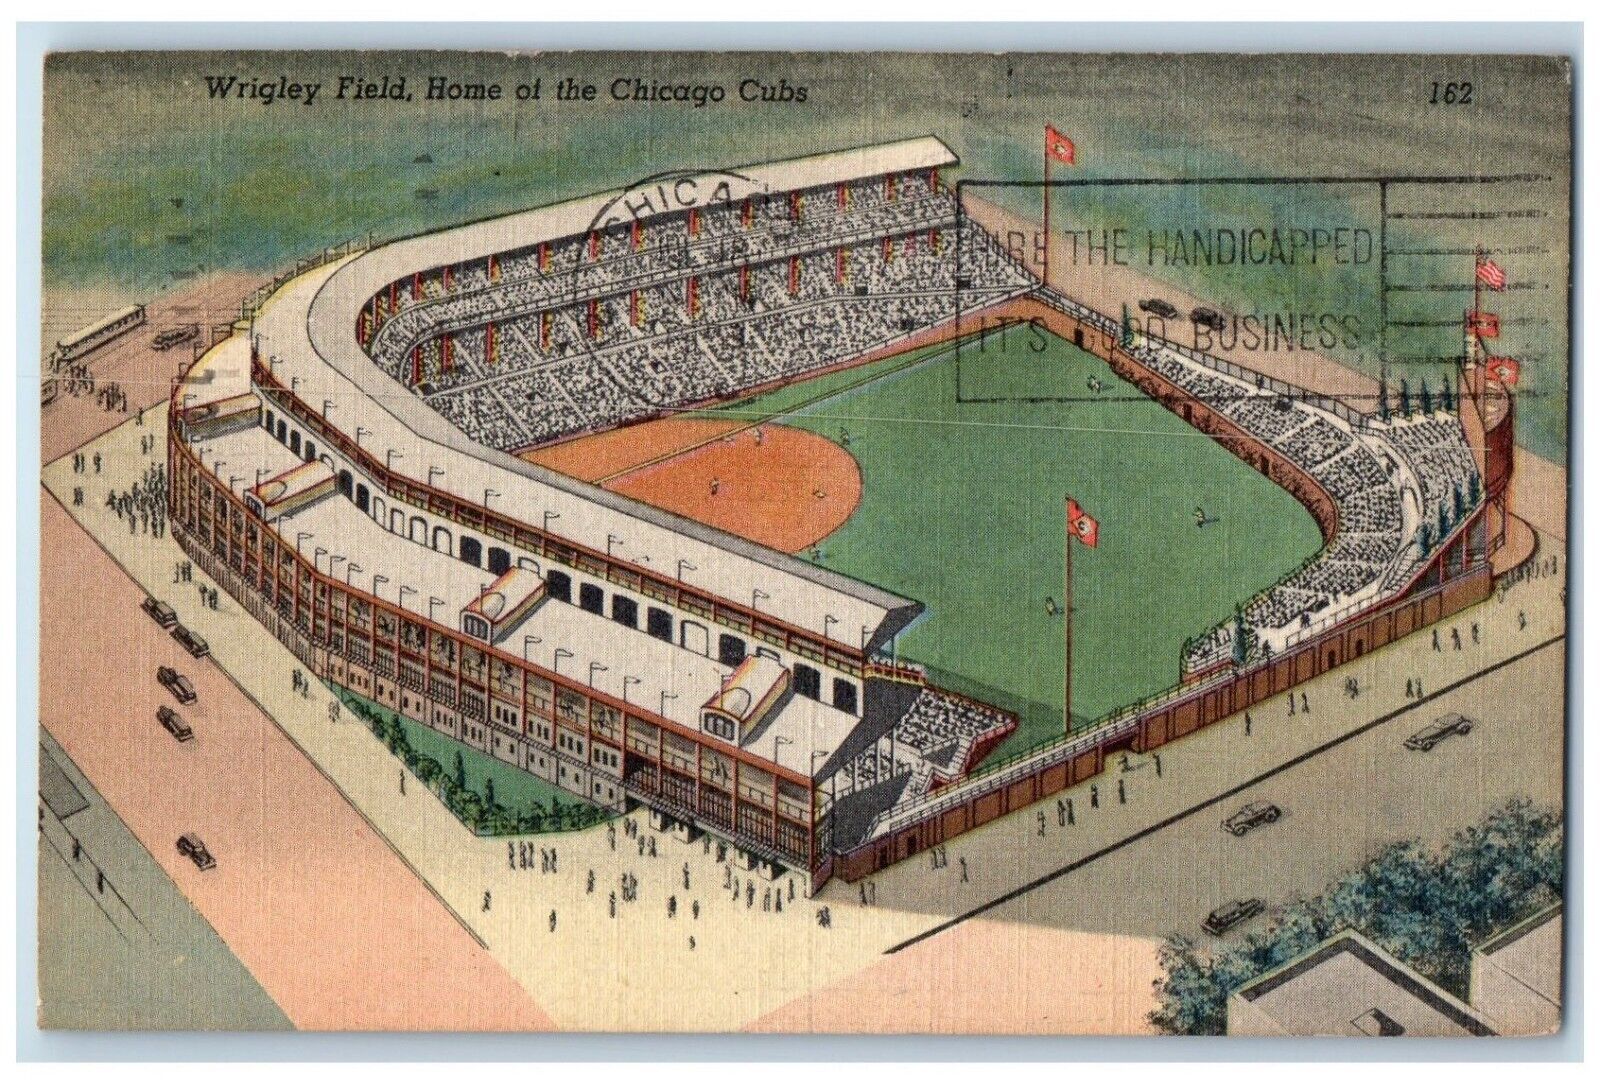 1951 Aerial View Of Wrigley Field Home Of The Chicago Cubs Illinois IL Postcard